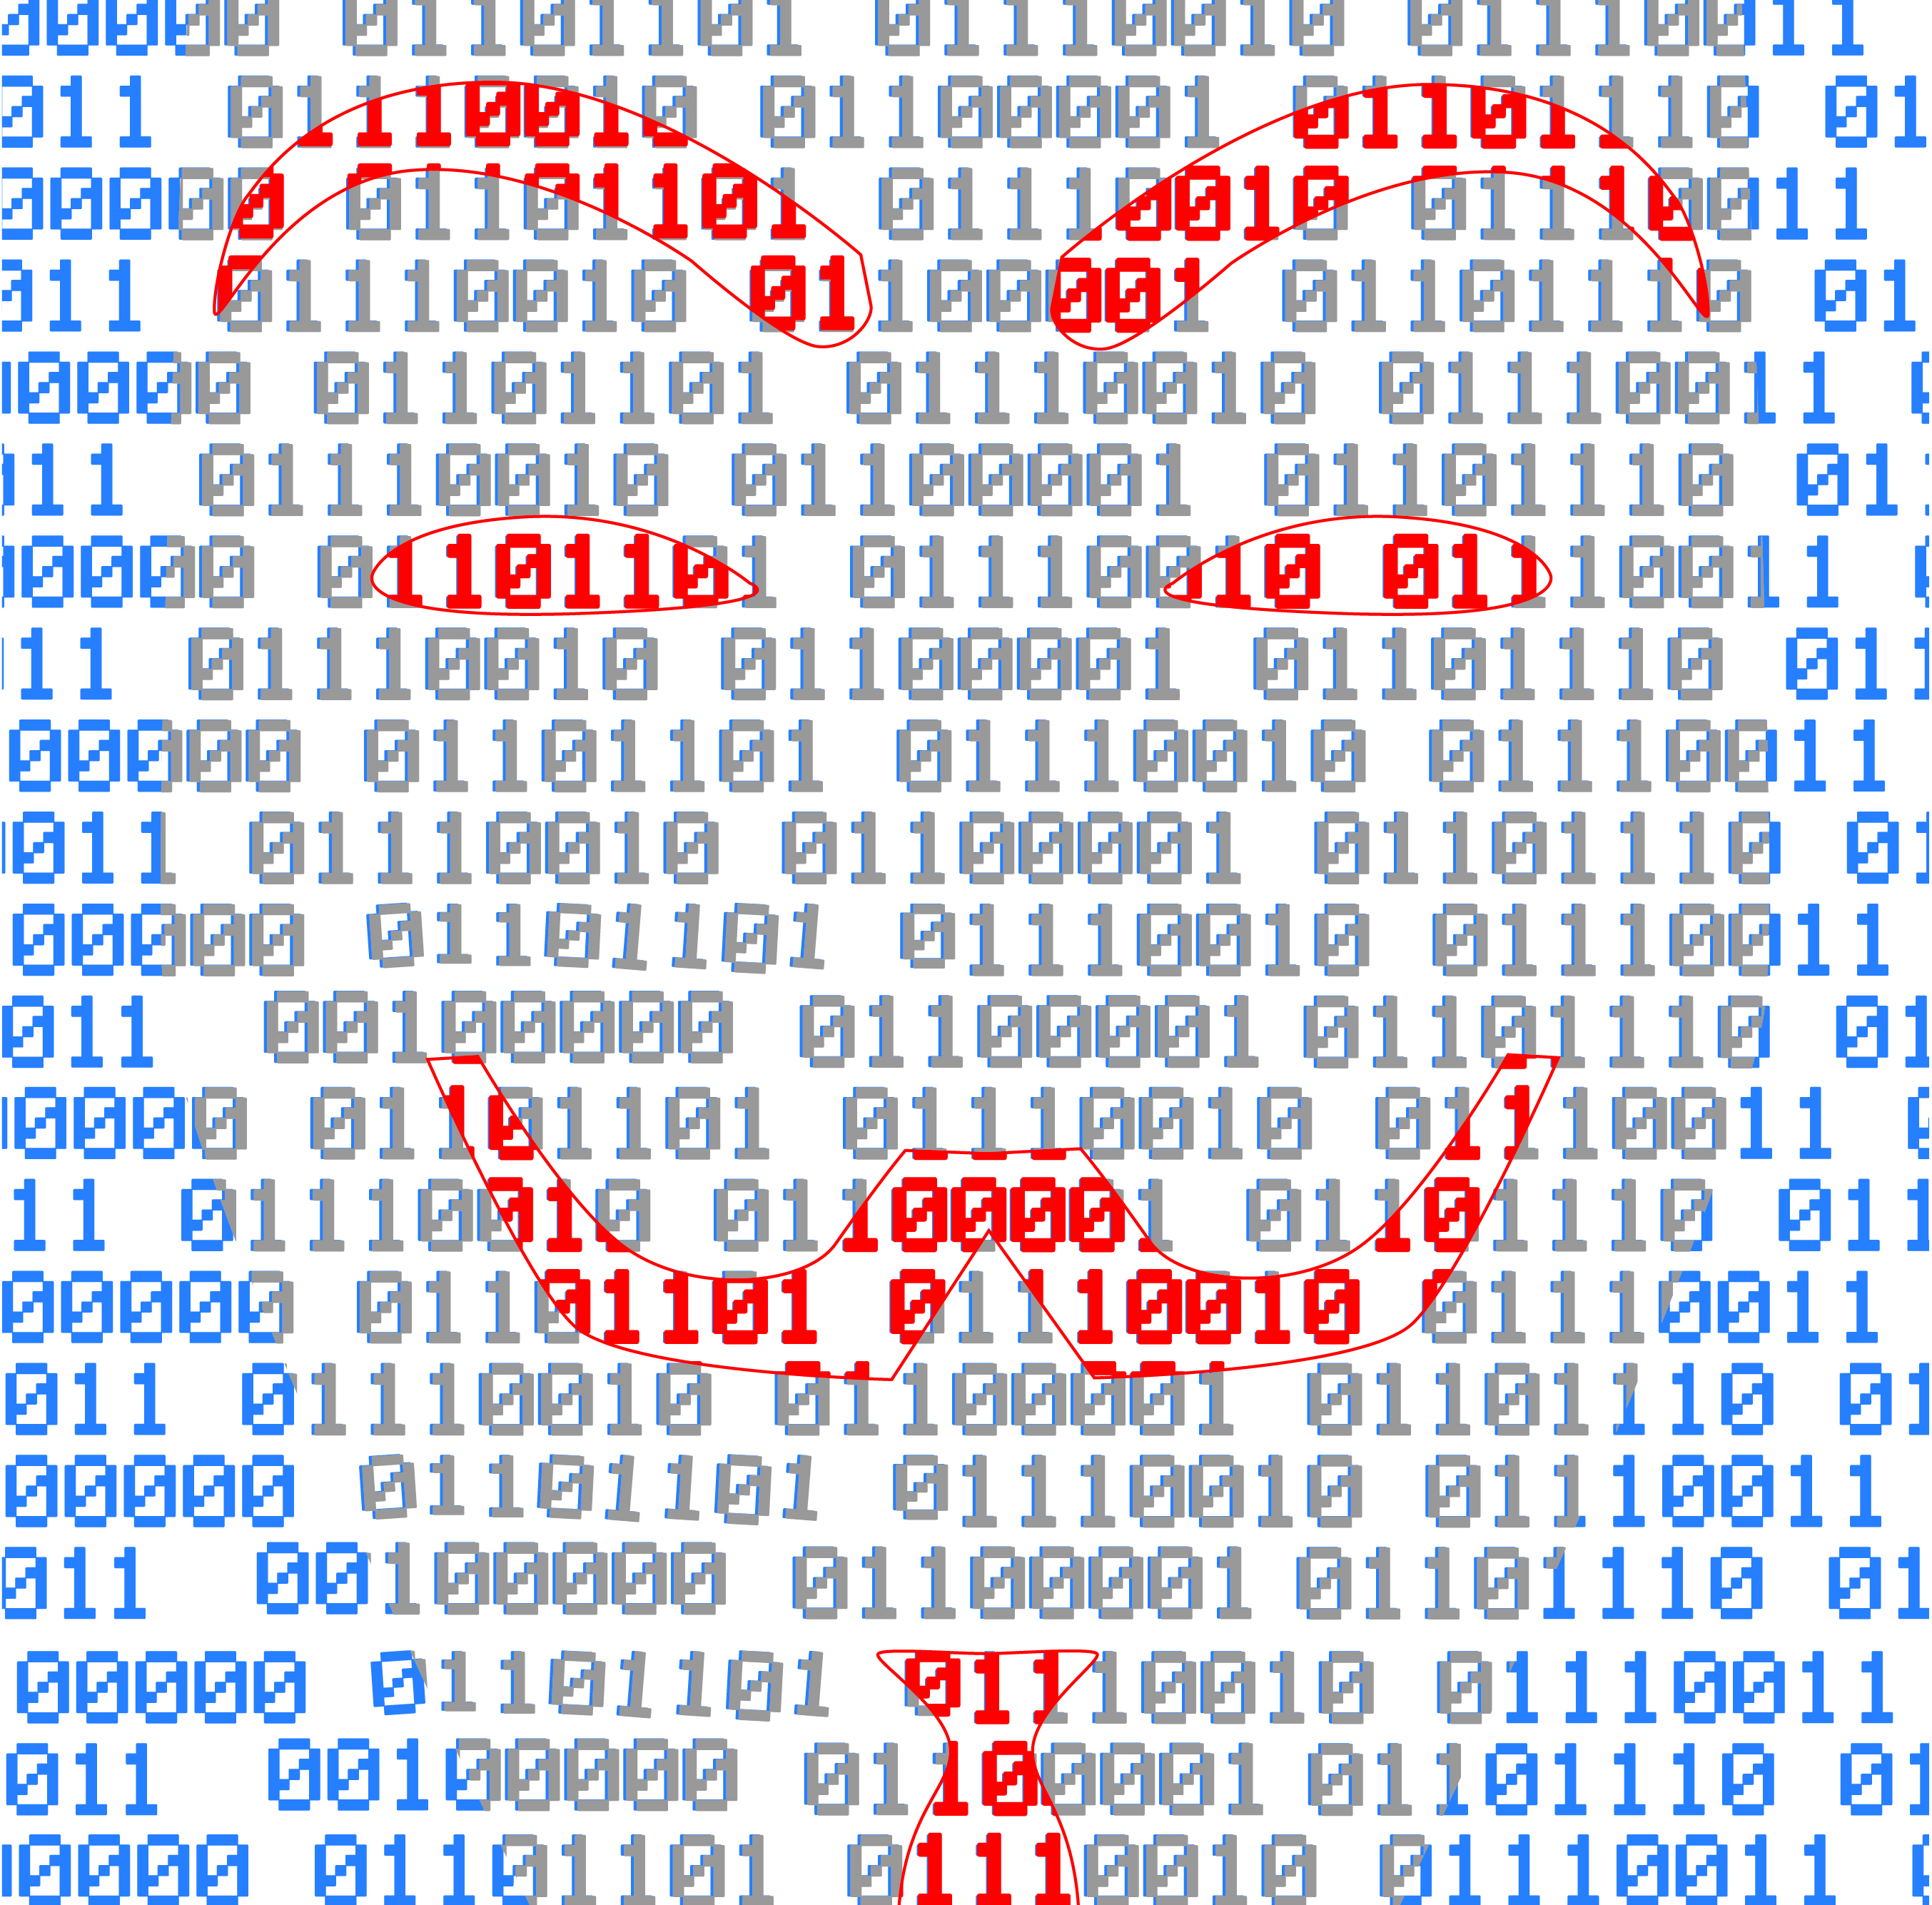 Computer ones and zeroes with Guy Fawkes face appearing in red.